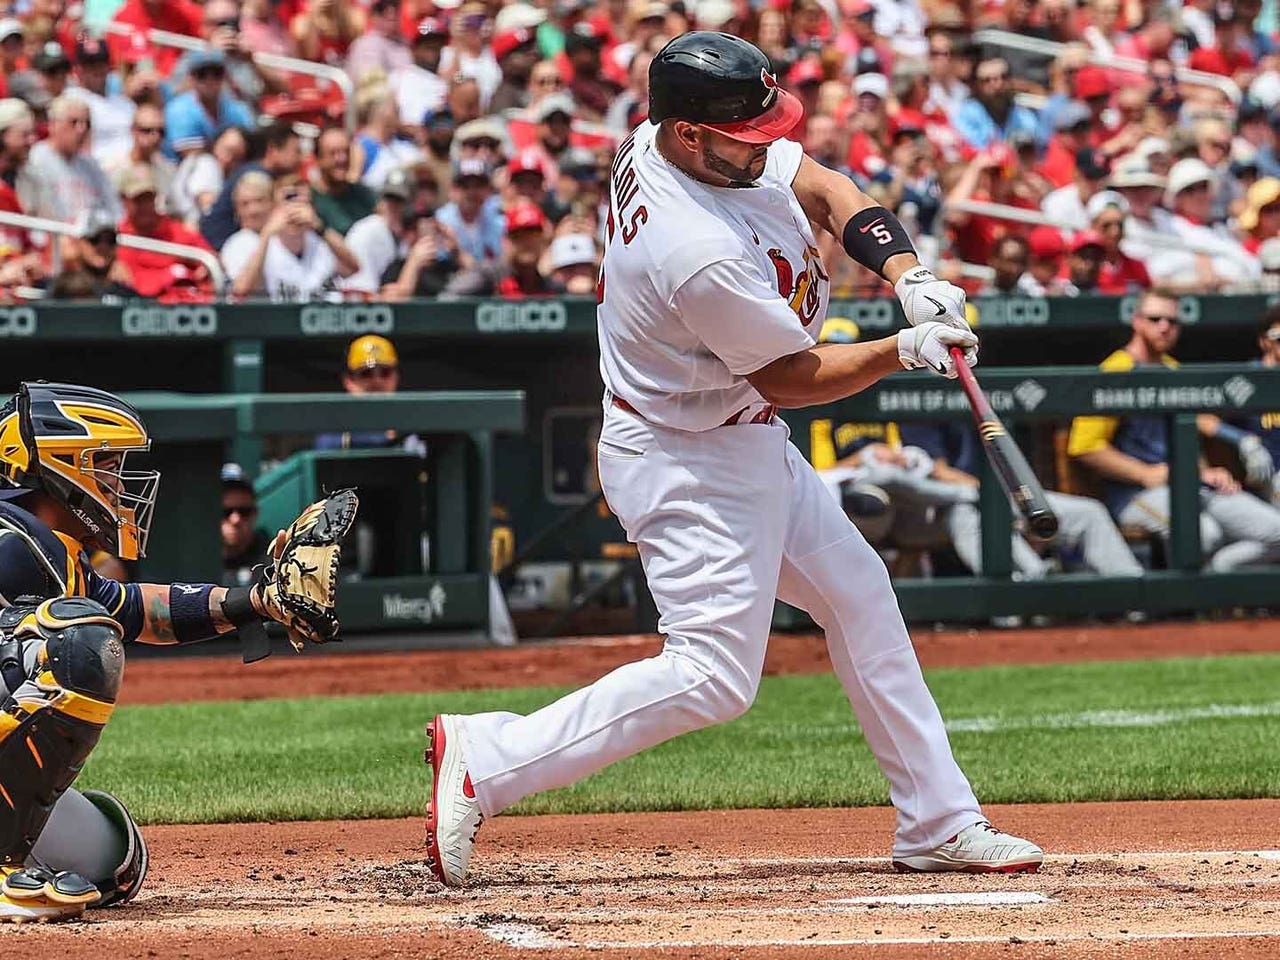 After 700 home runs, a look at Albert Pujols' time in the KC metro